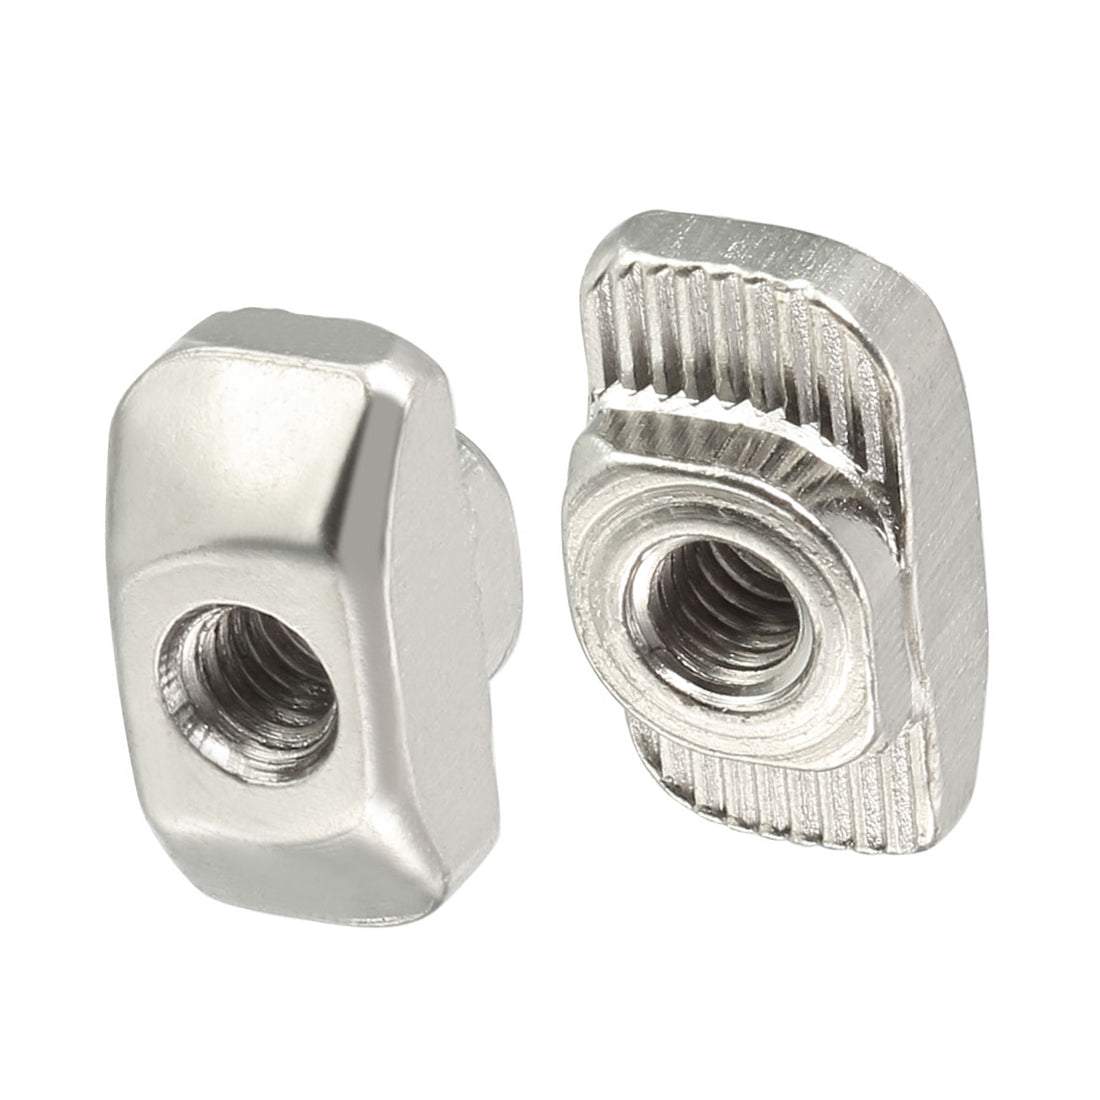 Uxcell Uxcell Sliding T Slot Nuts, M6 Thread for 3030 Series Aluminum Extrusion Profile 10pcs